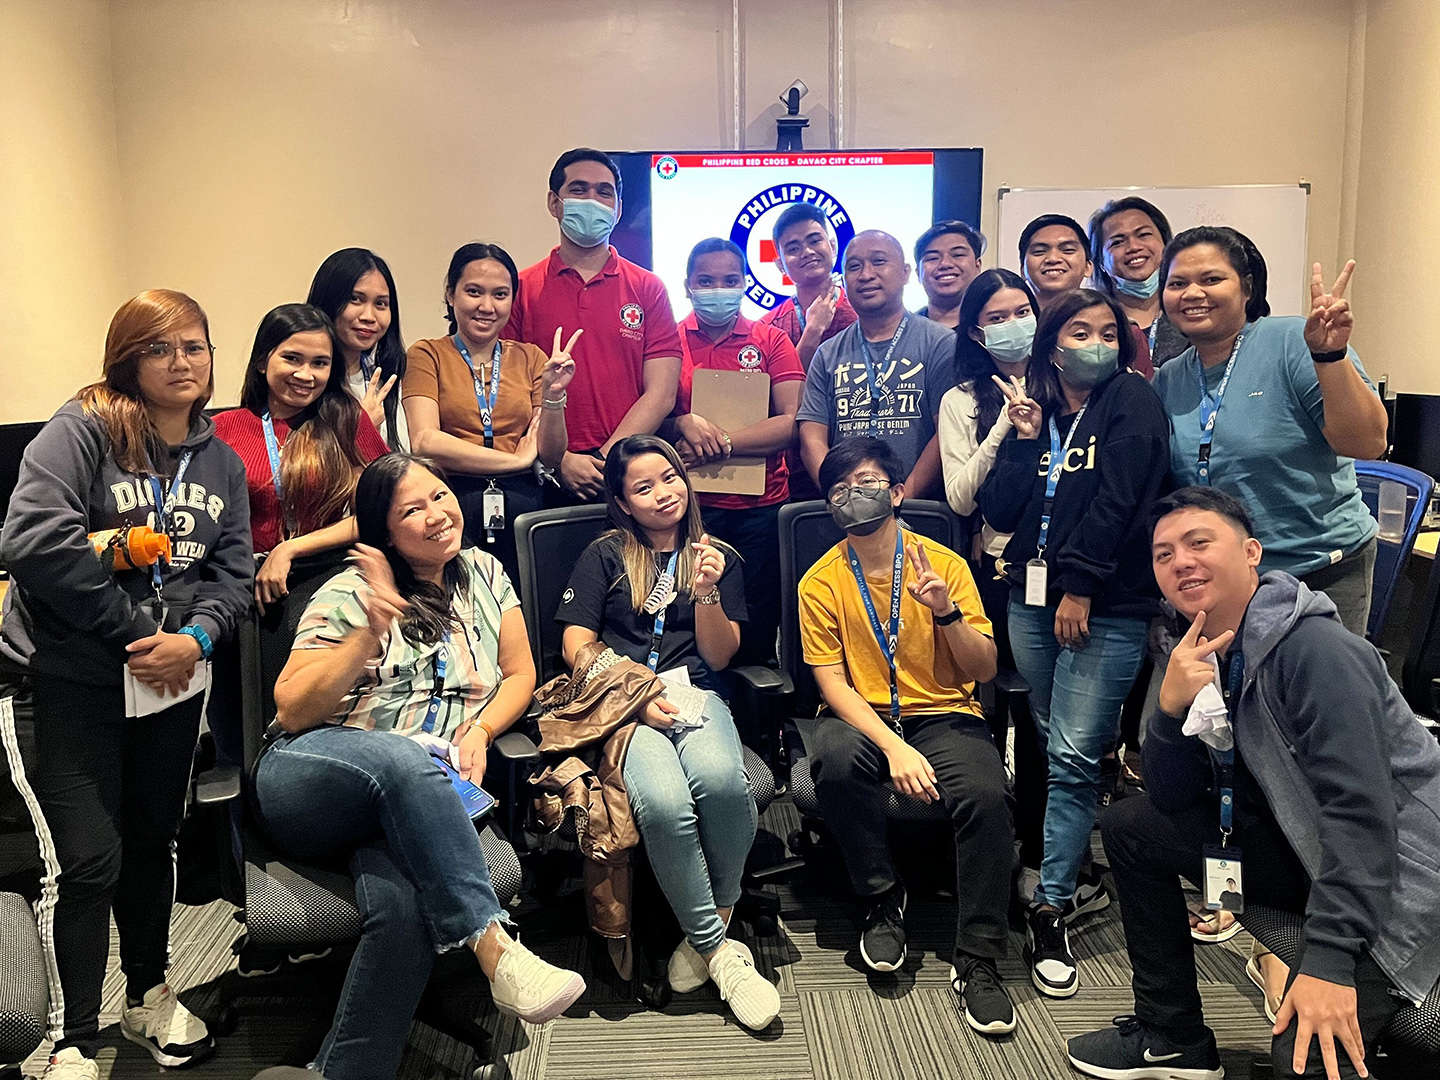 Open Access BPO Davao recently completed a first aid training conducted by the Philippine Red Cross